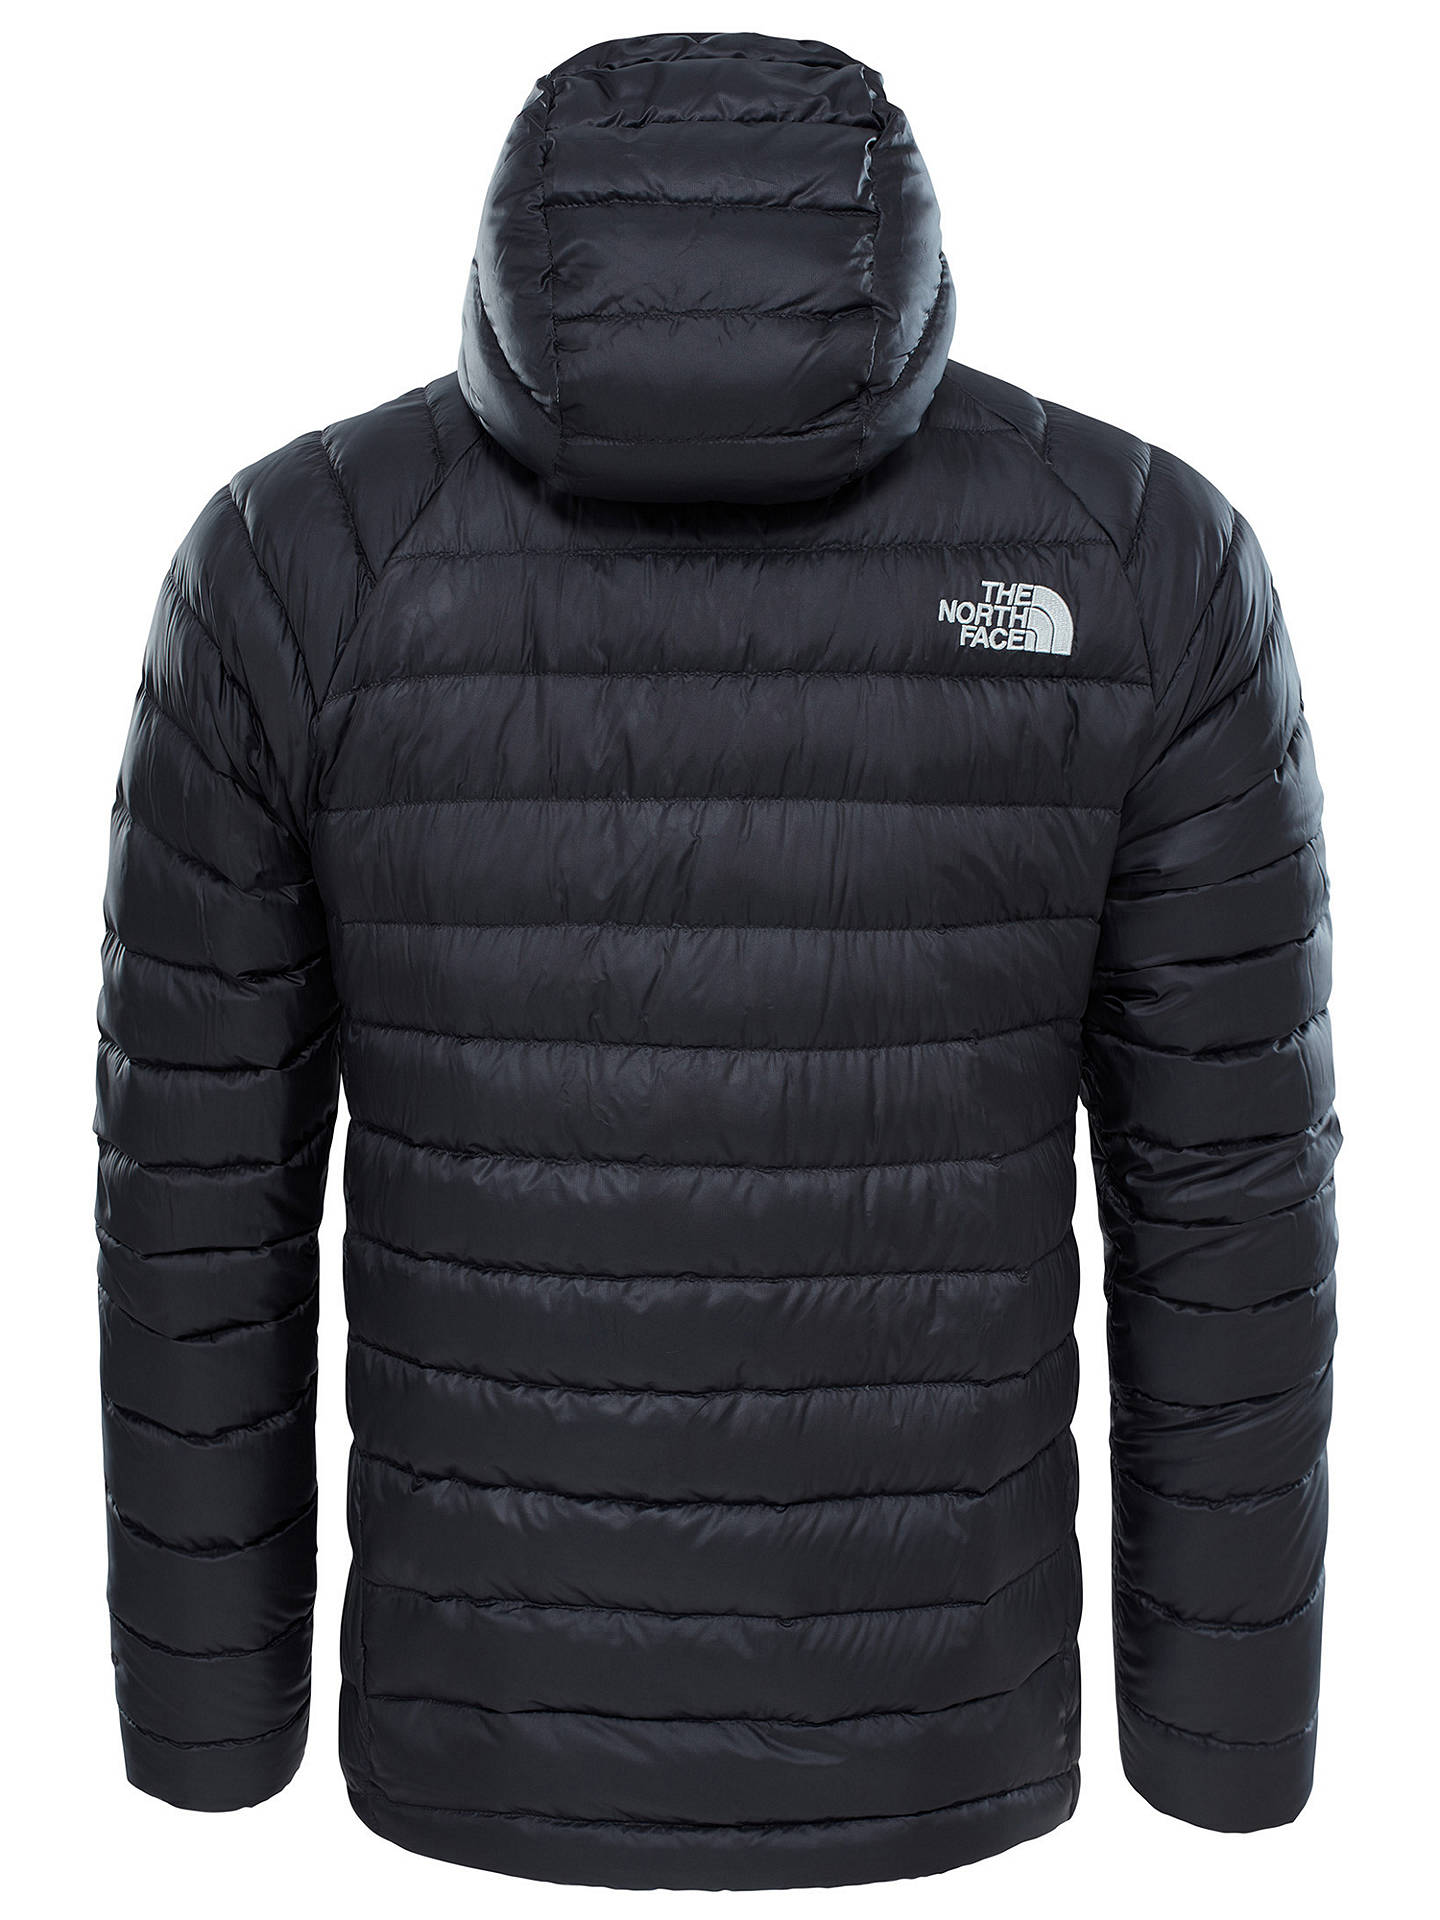 The North Face Trevail Men's Hoodie, Black at John Lewis & Partners